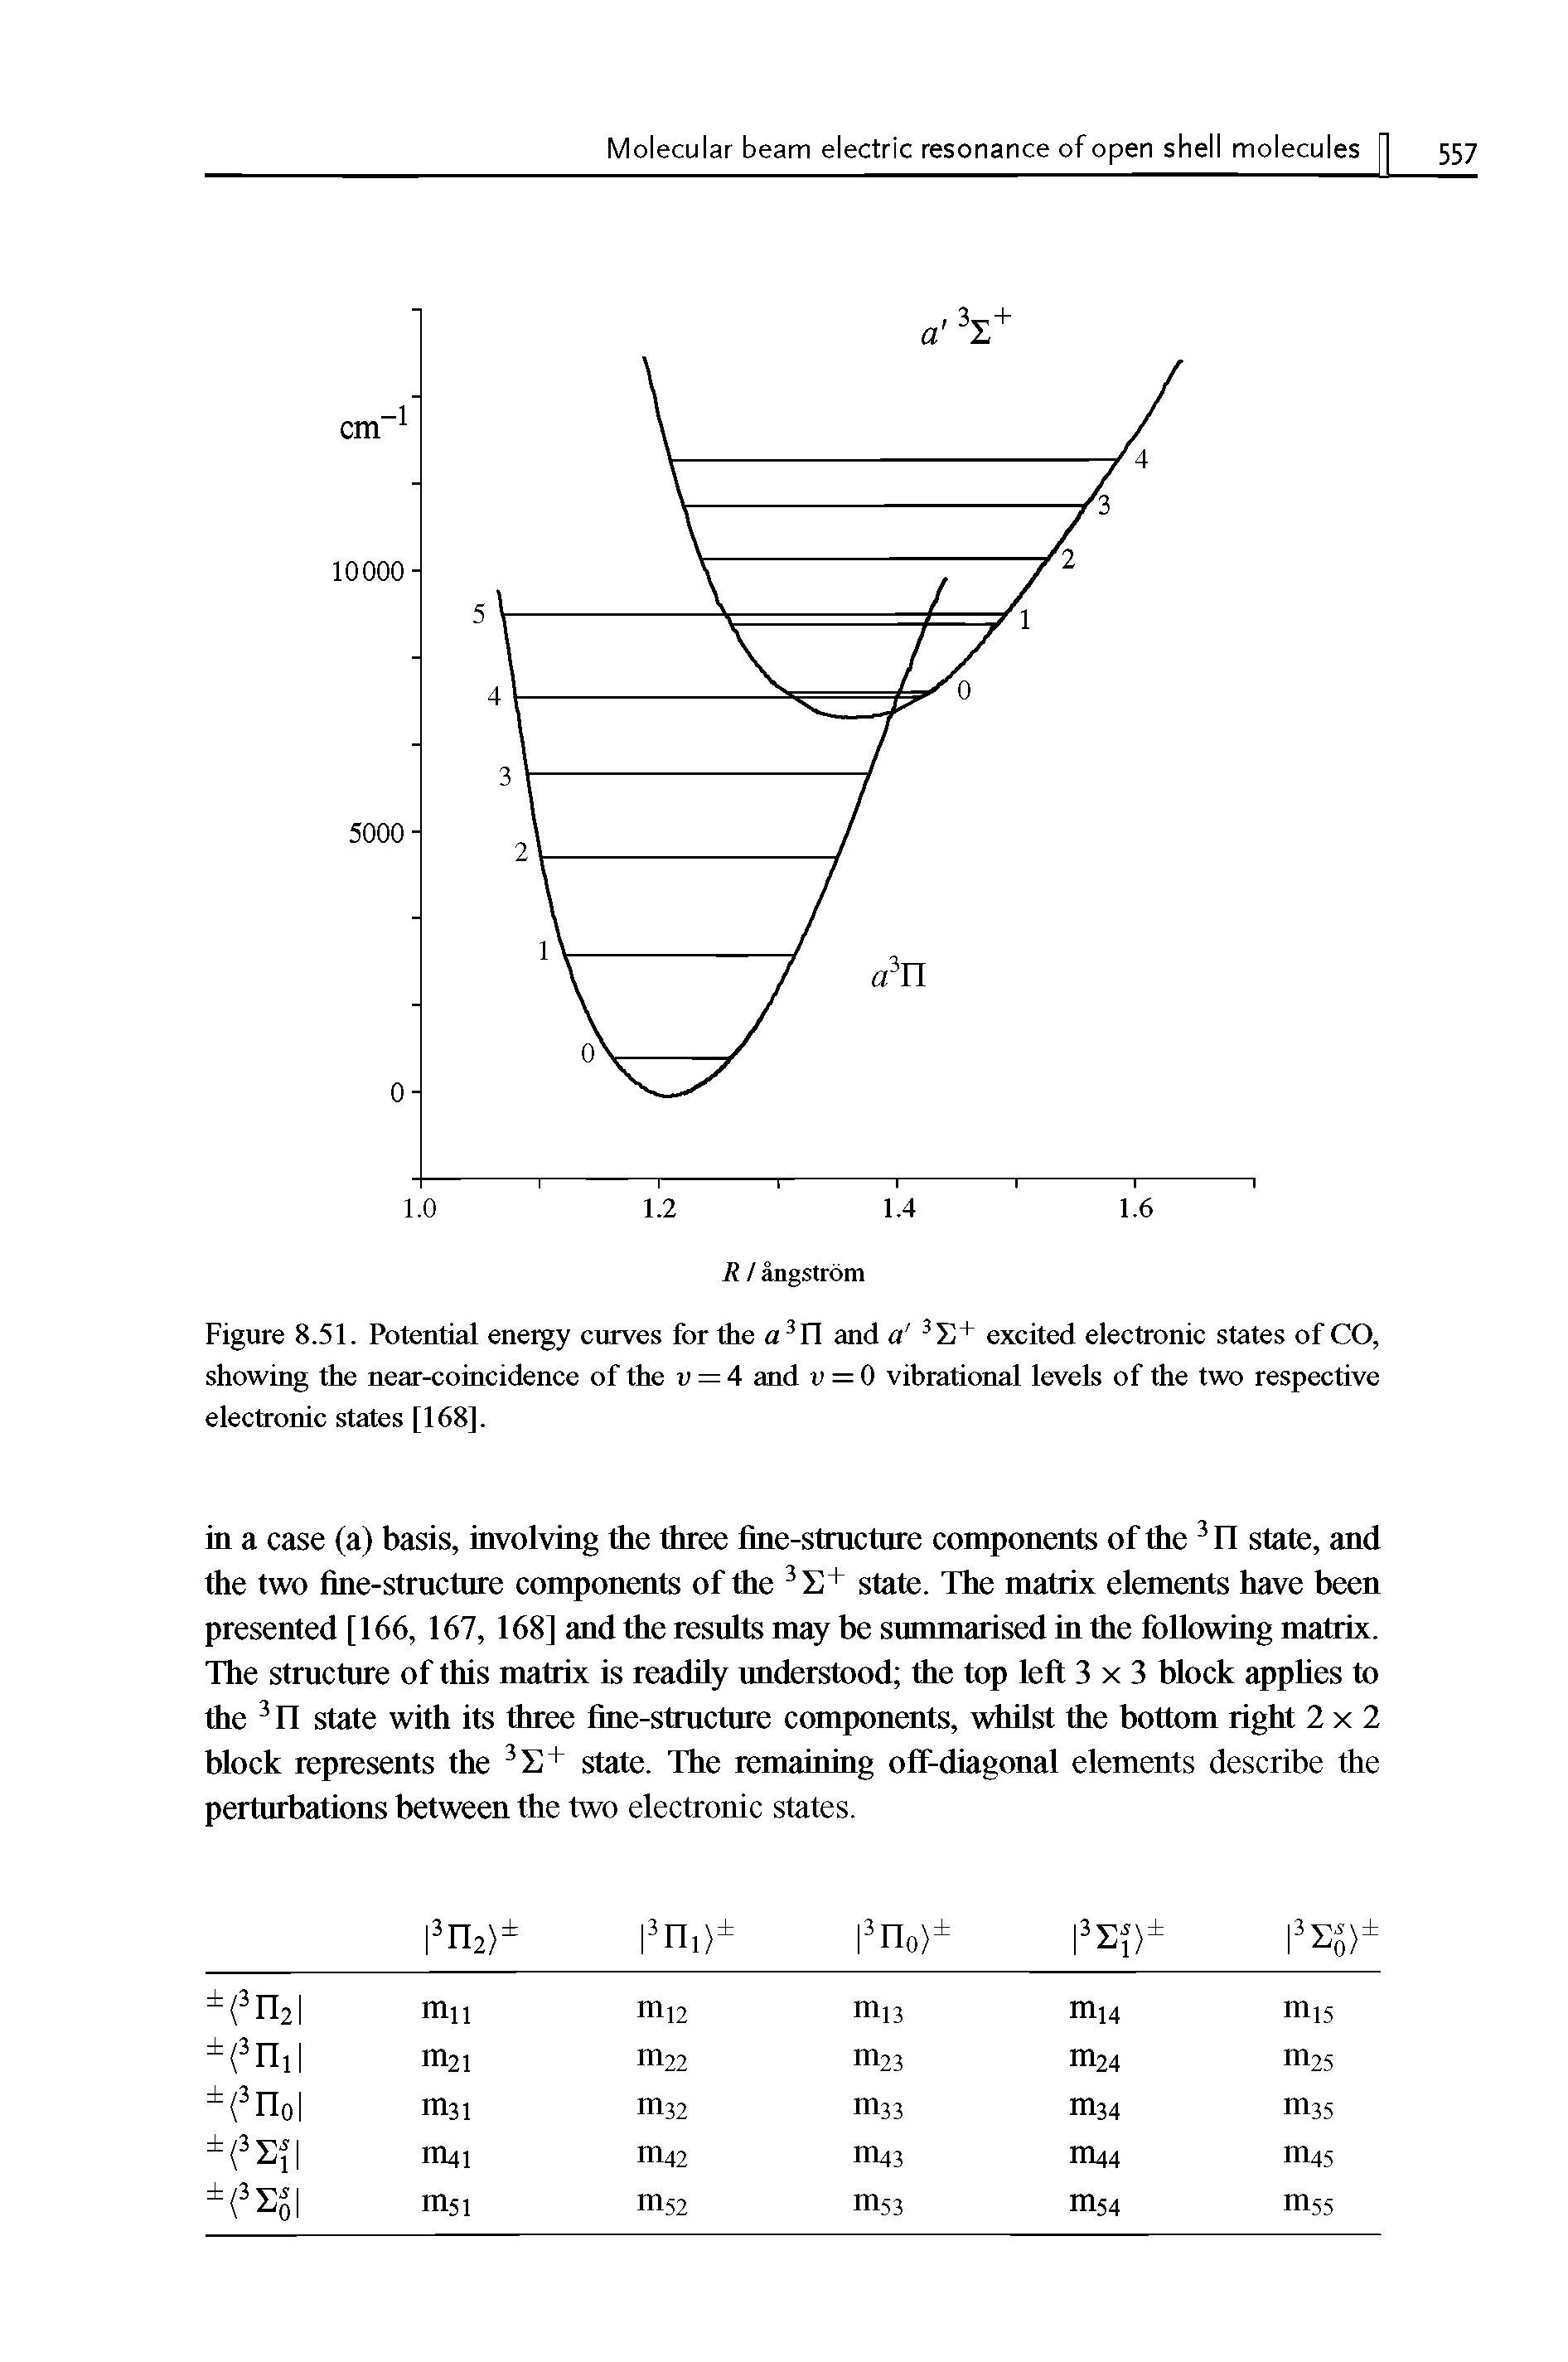 Figure 8.51. Potential energy curves for the a 3n and a 3S+ excited electronic states of CO, showing the near-coincidence of the v = 4 and u = 0 vibrational levels of the two respective electronic states [168].